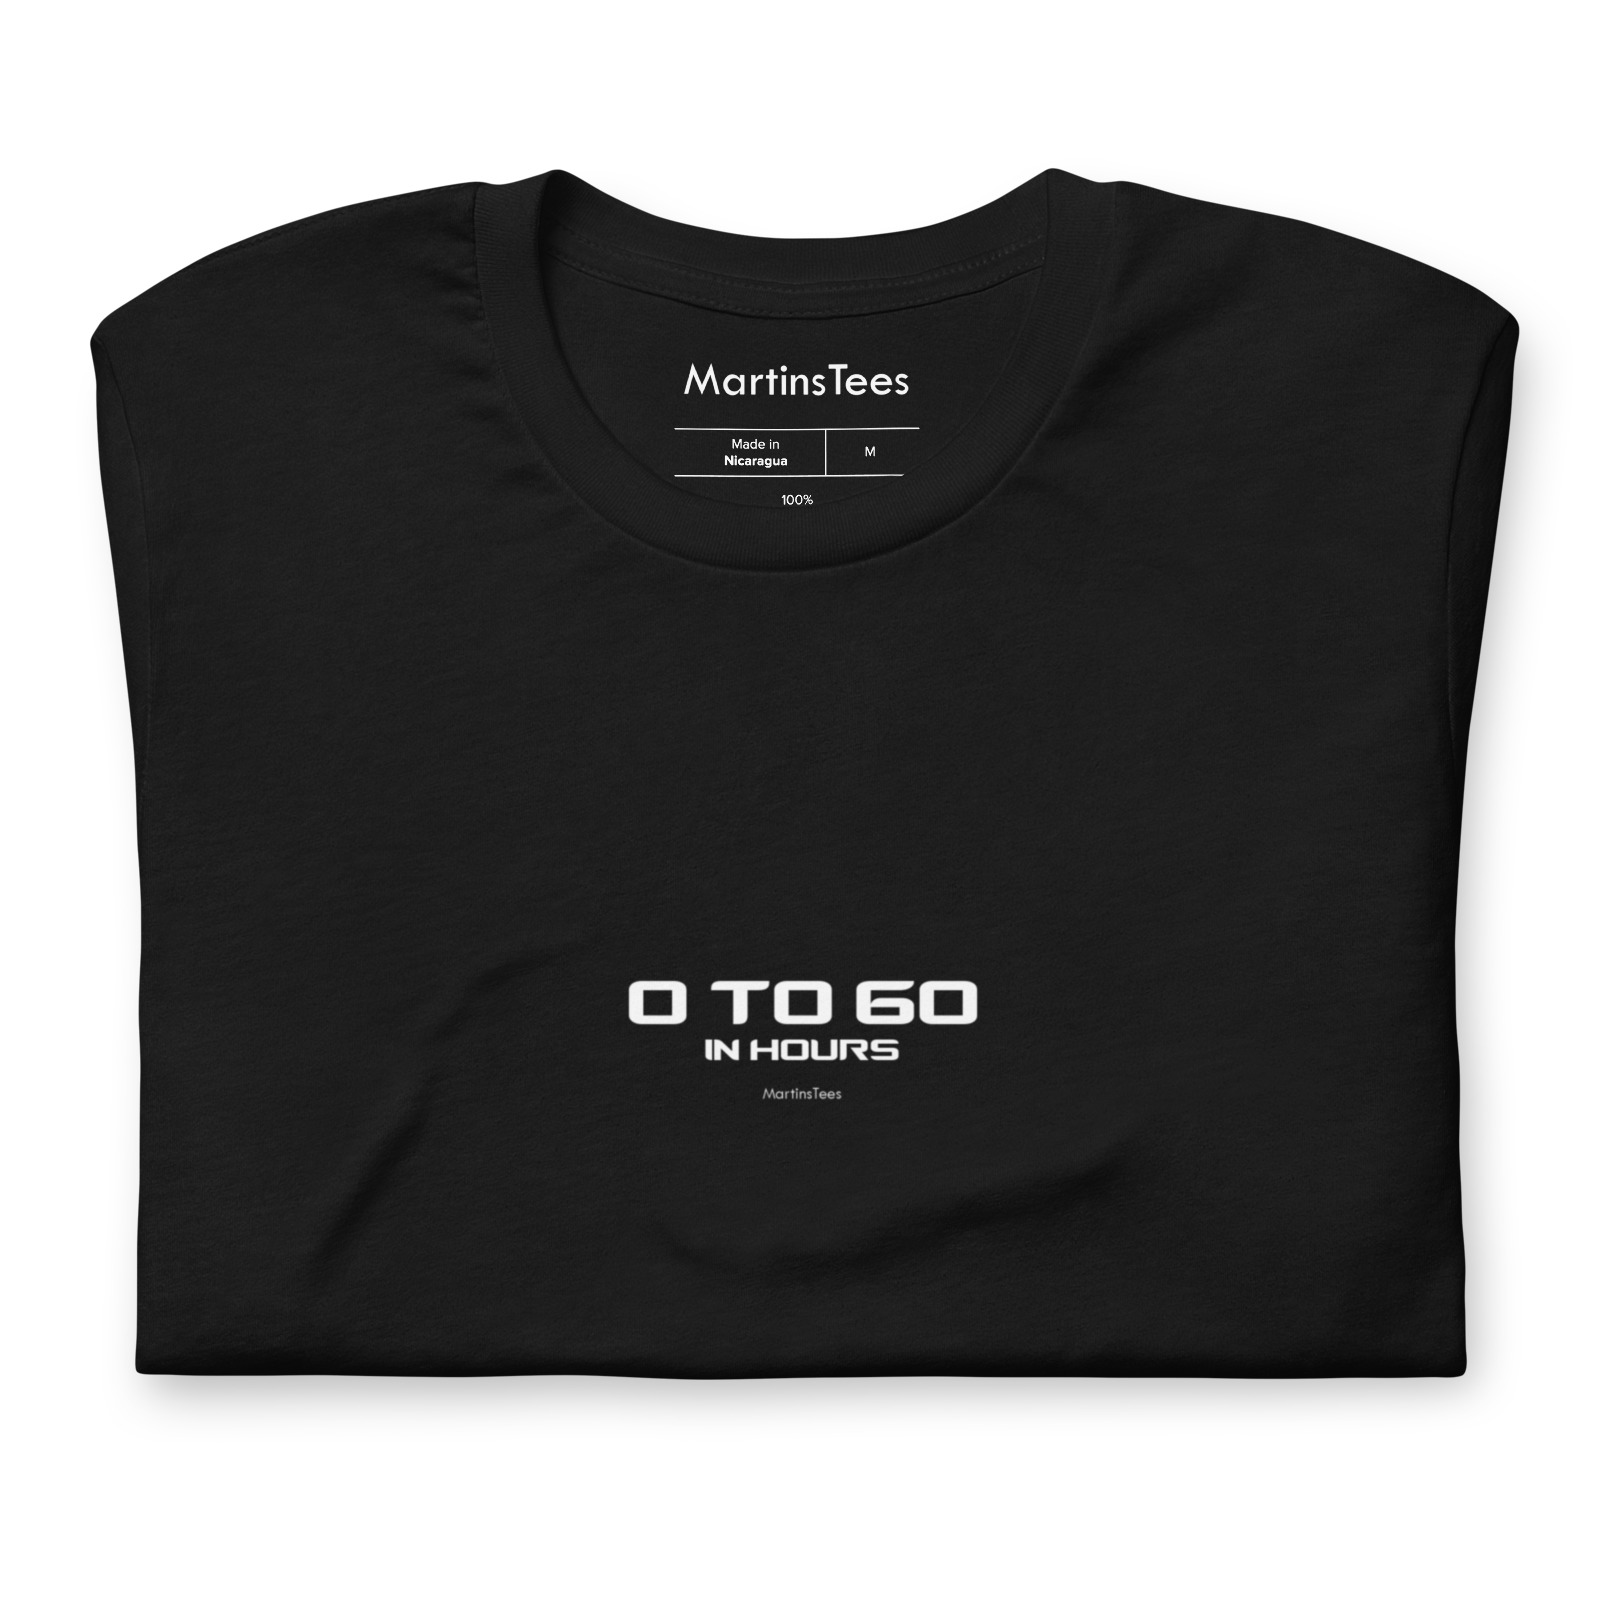 T-shirt: 0 TO 60 - IN HOURS